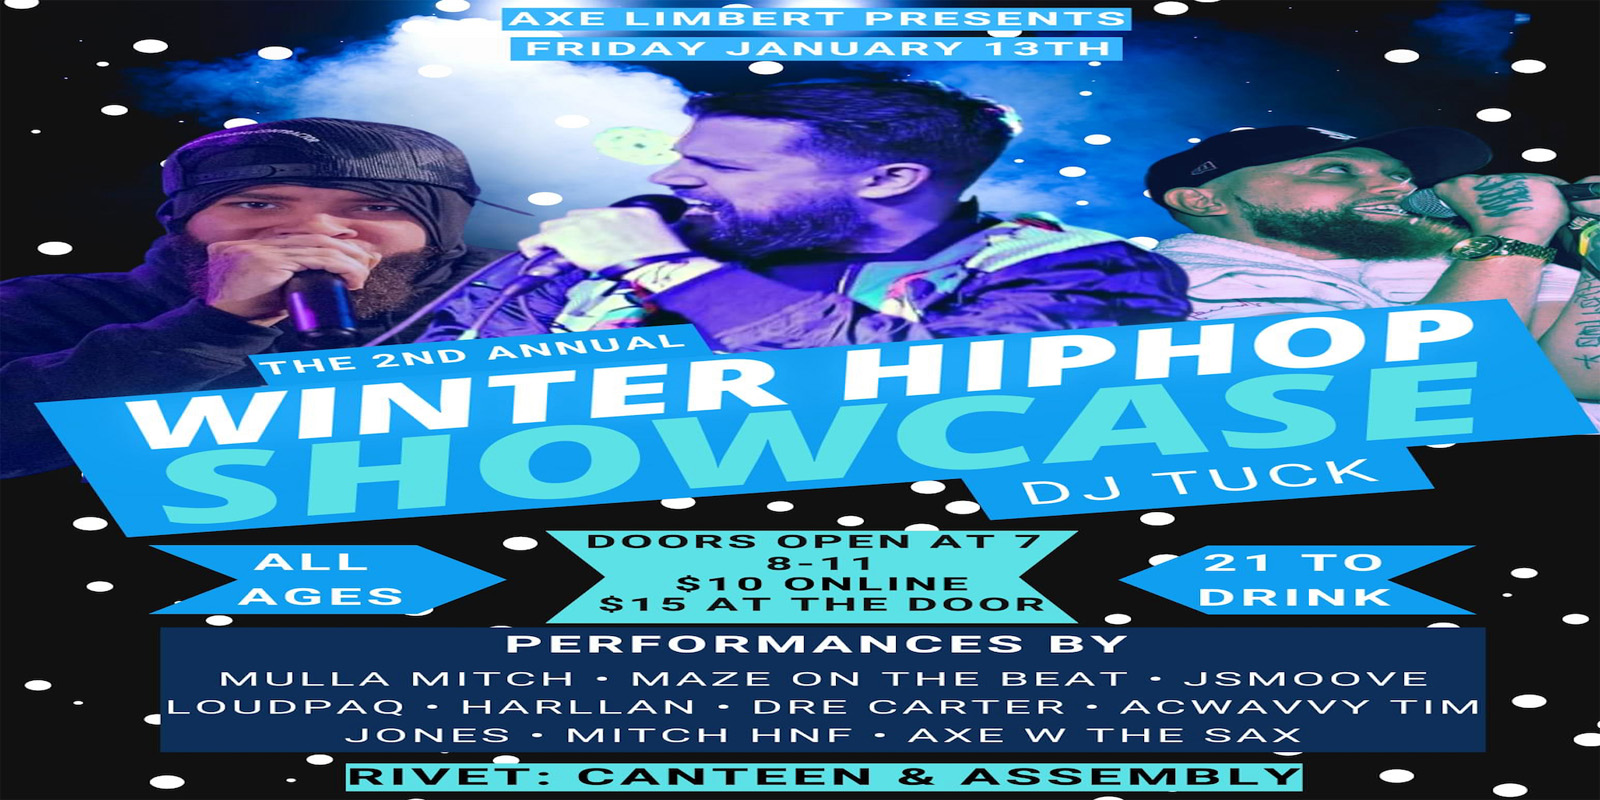 The 2nd Annual Winter Hip-Hop Showcase will feature 10 area artists taking our stage at Rivet on Friday, January 13th!